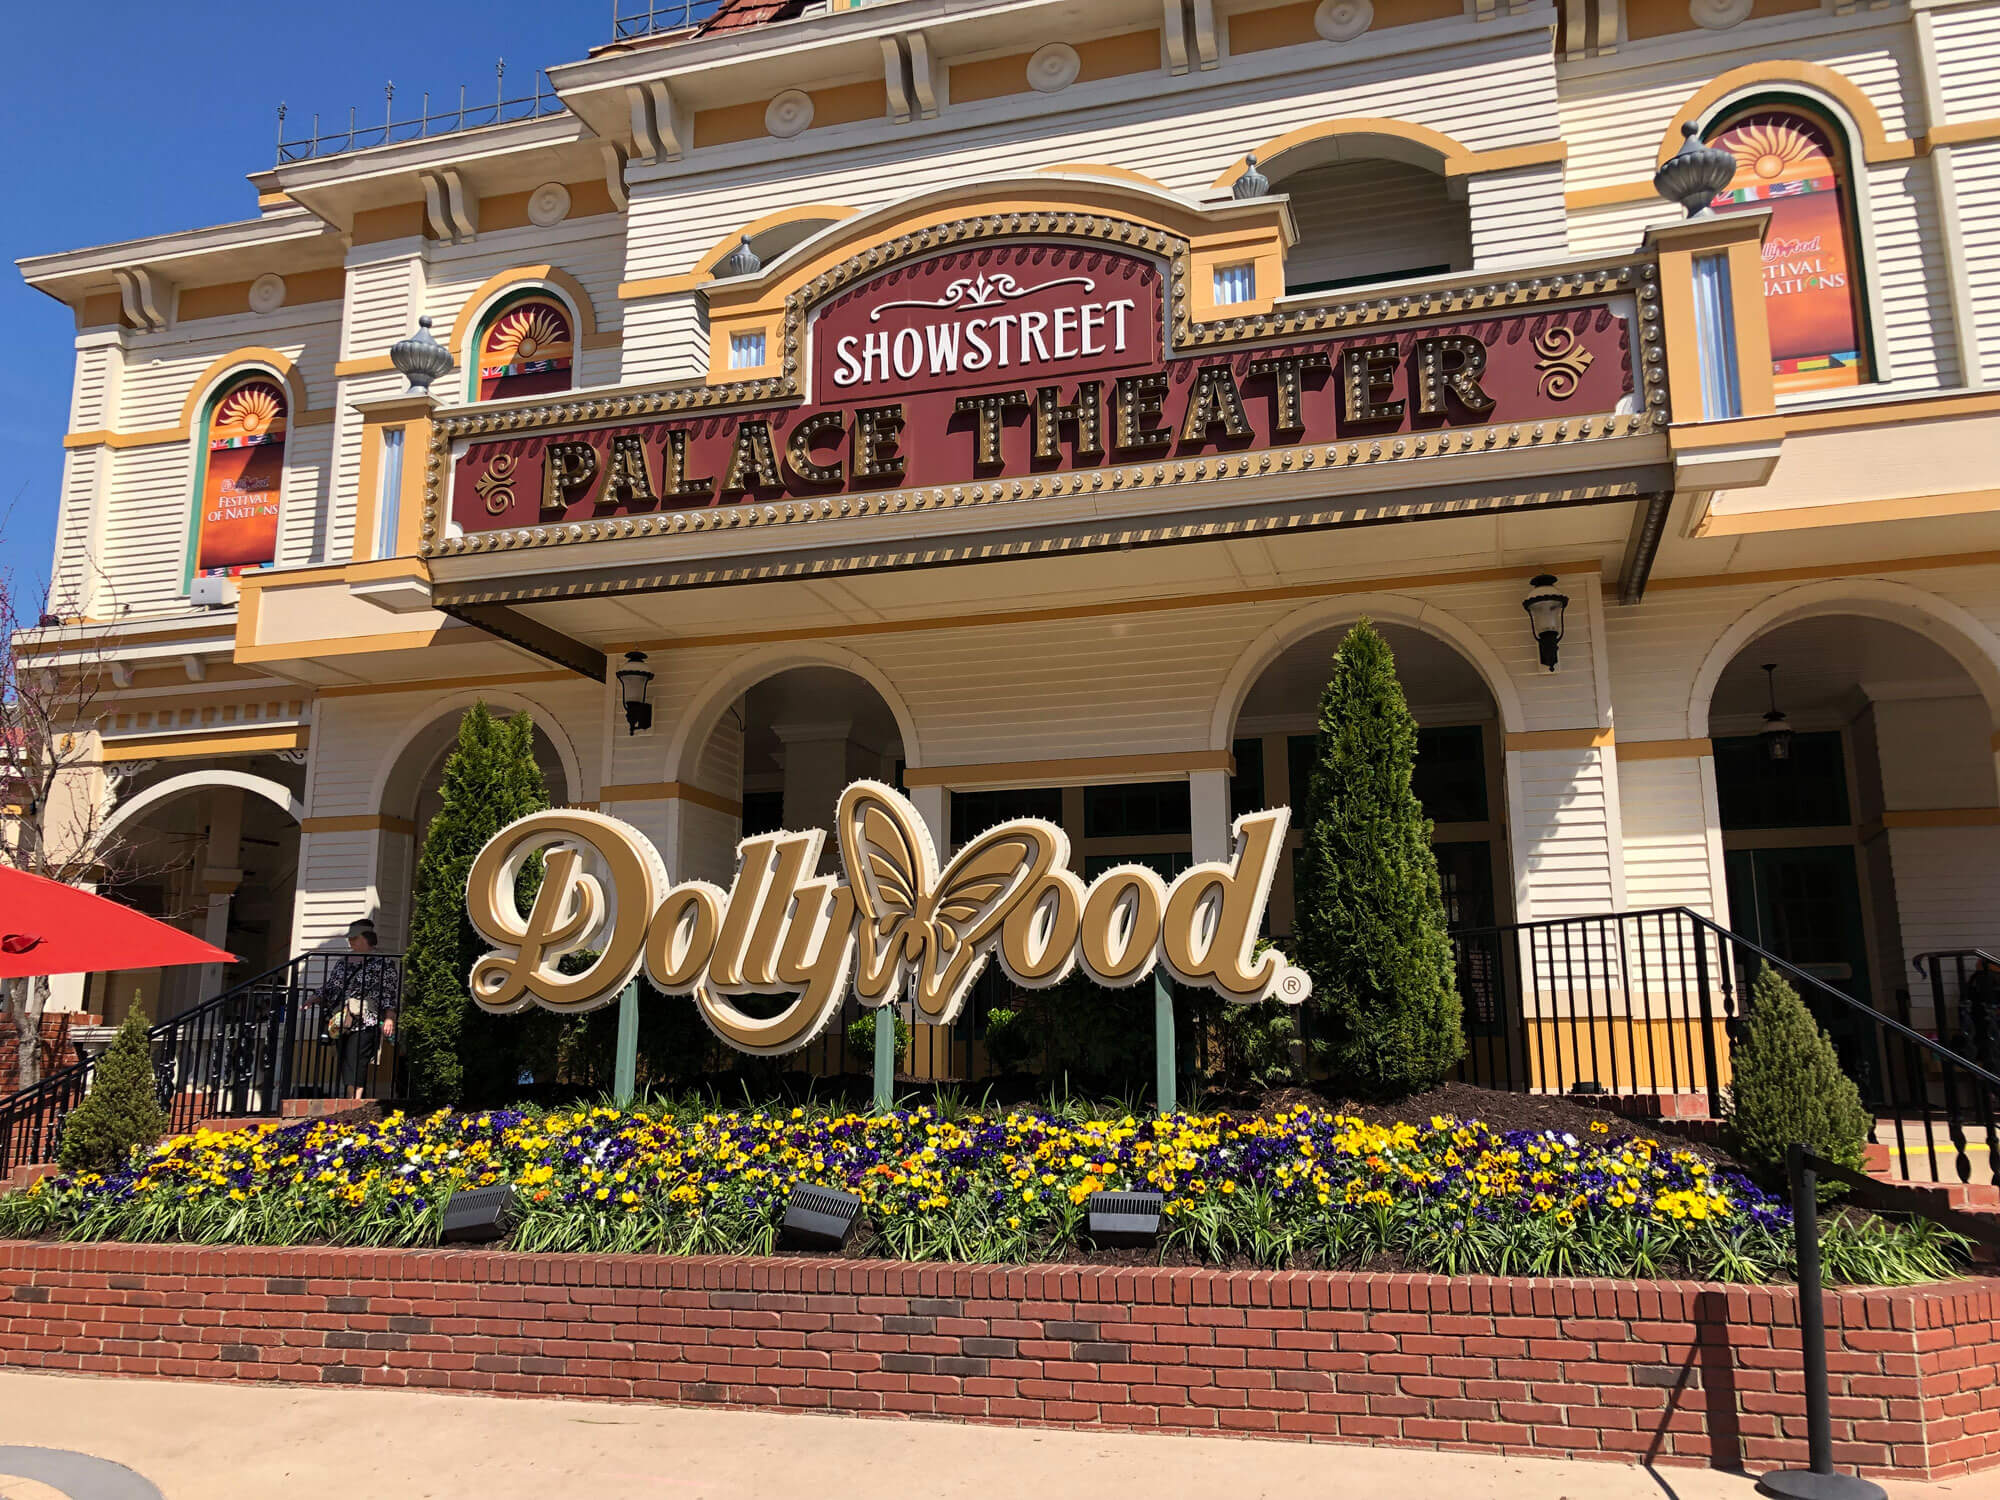 Dollywood sign at the entrance to the Palace Theater